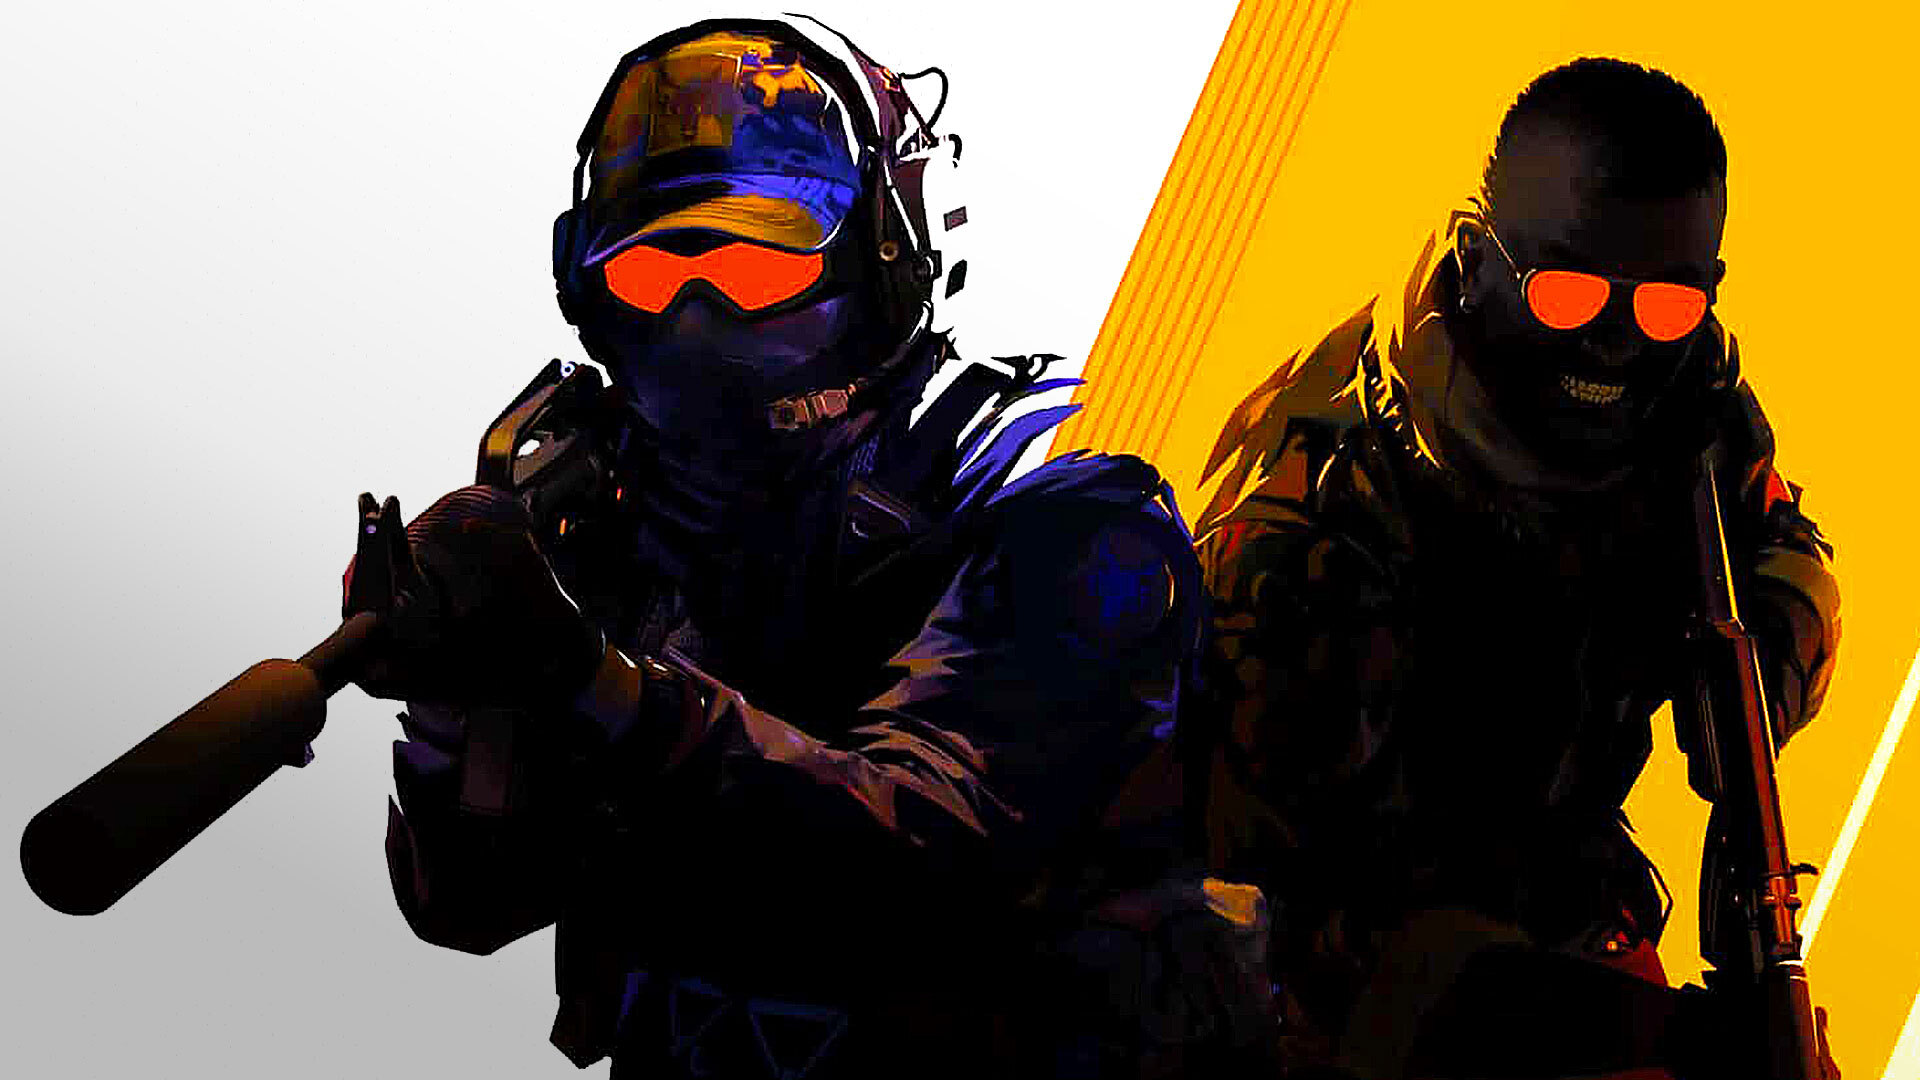 How To Play Counter-Strike 2 Limited Test | GameSpot News